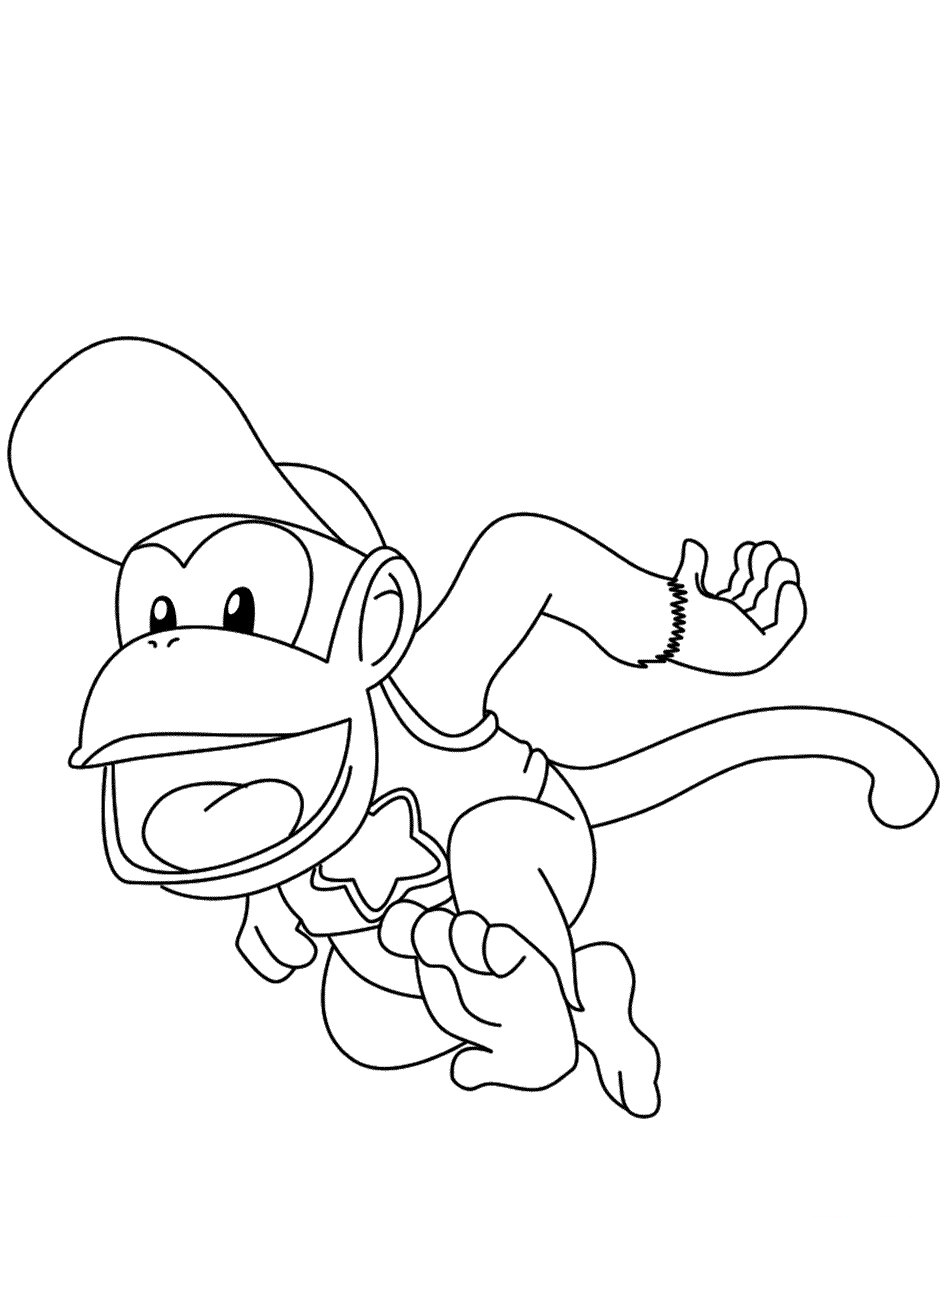 Diddy Kong Is Wearing A Cap Is Running Coloring Page Free Printable